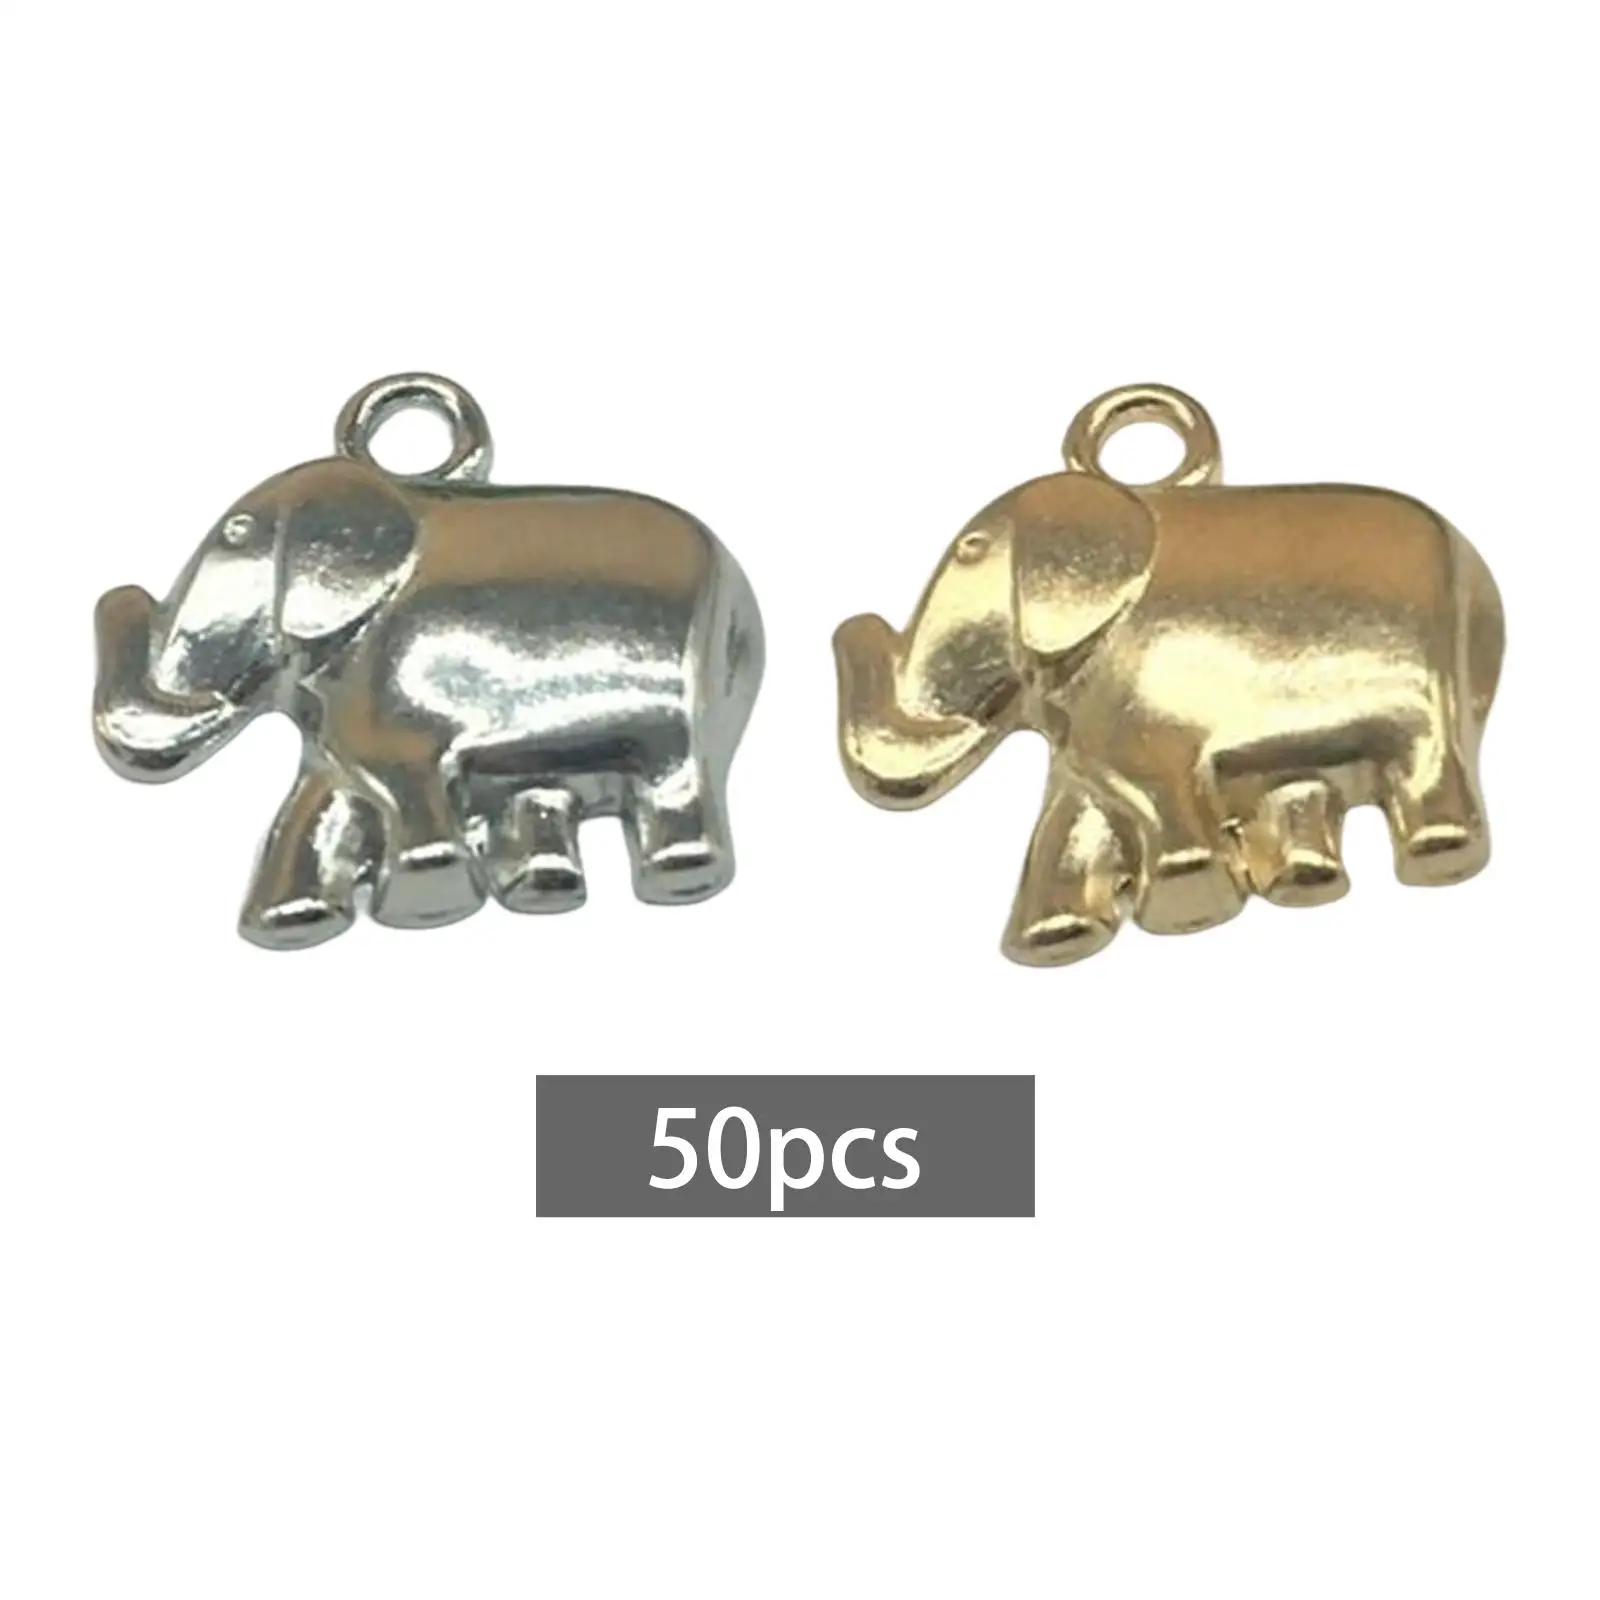 50Pcs Elephant Charms DIY Jewelry Making with 3mm Hole 1.85Cmx1.9cm Alloy Pendants for Necklace Bracelet Clothing Craft Project